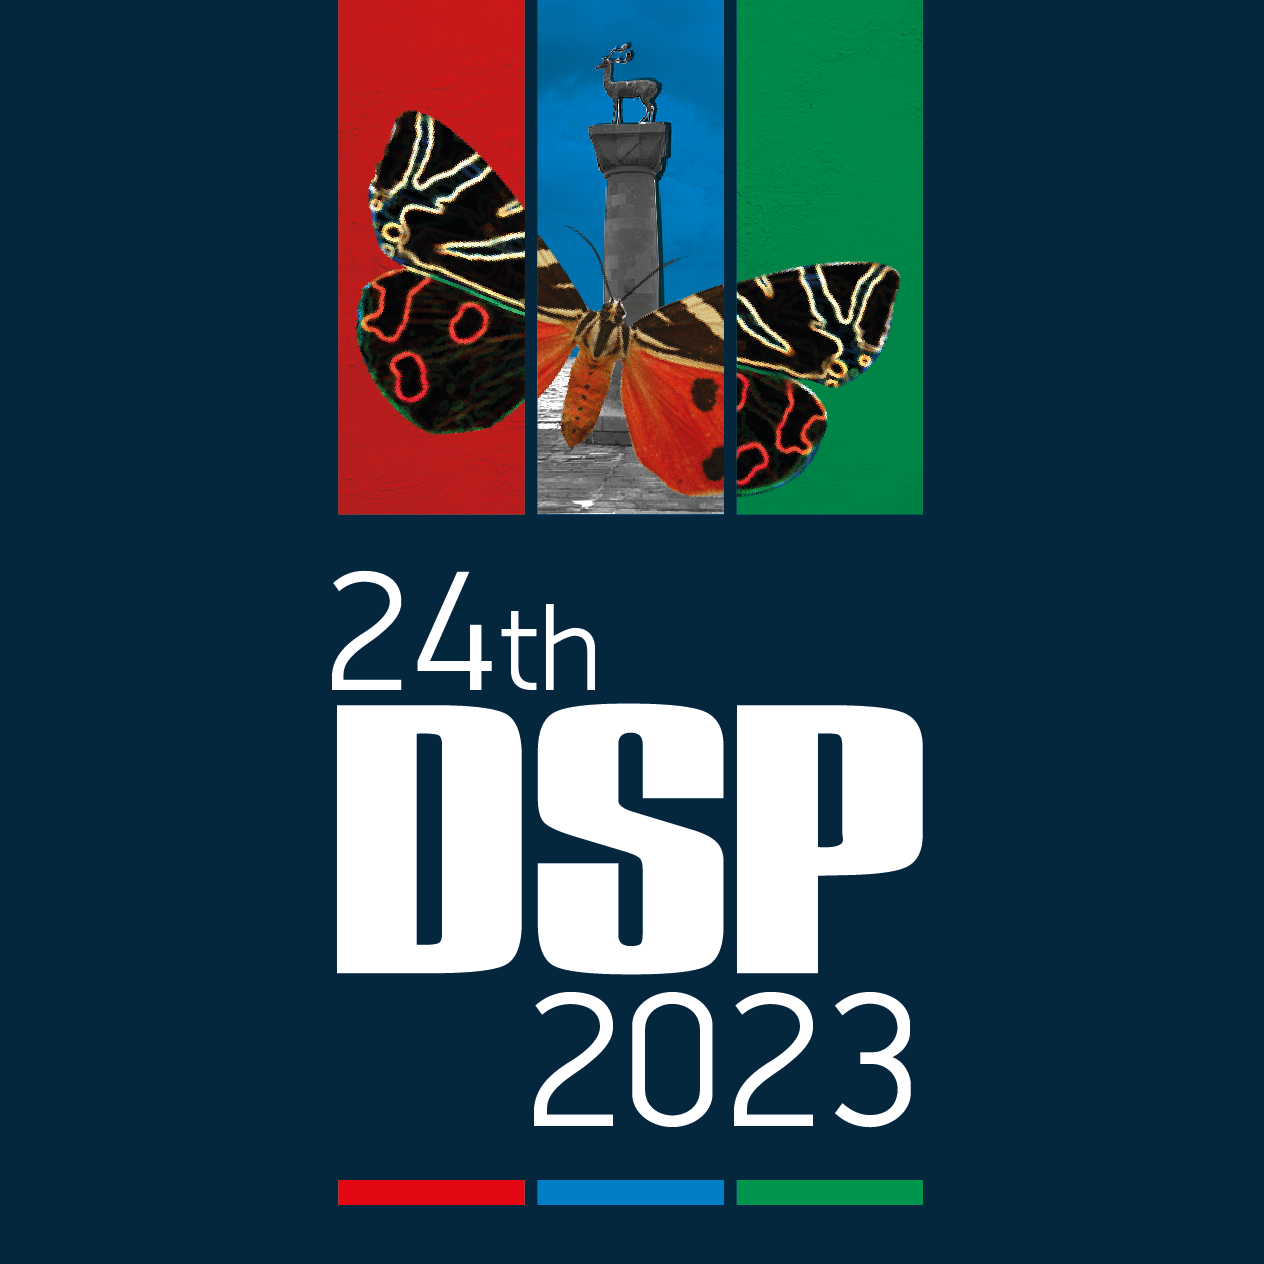 DSP 2023 (24th International Conference on Digital Signal Processing)